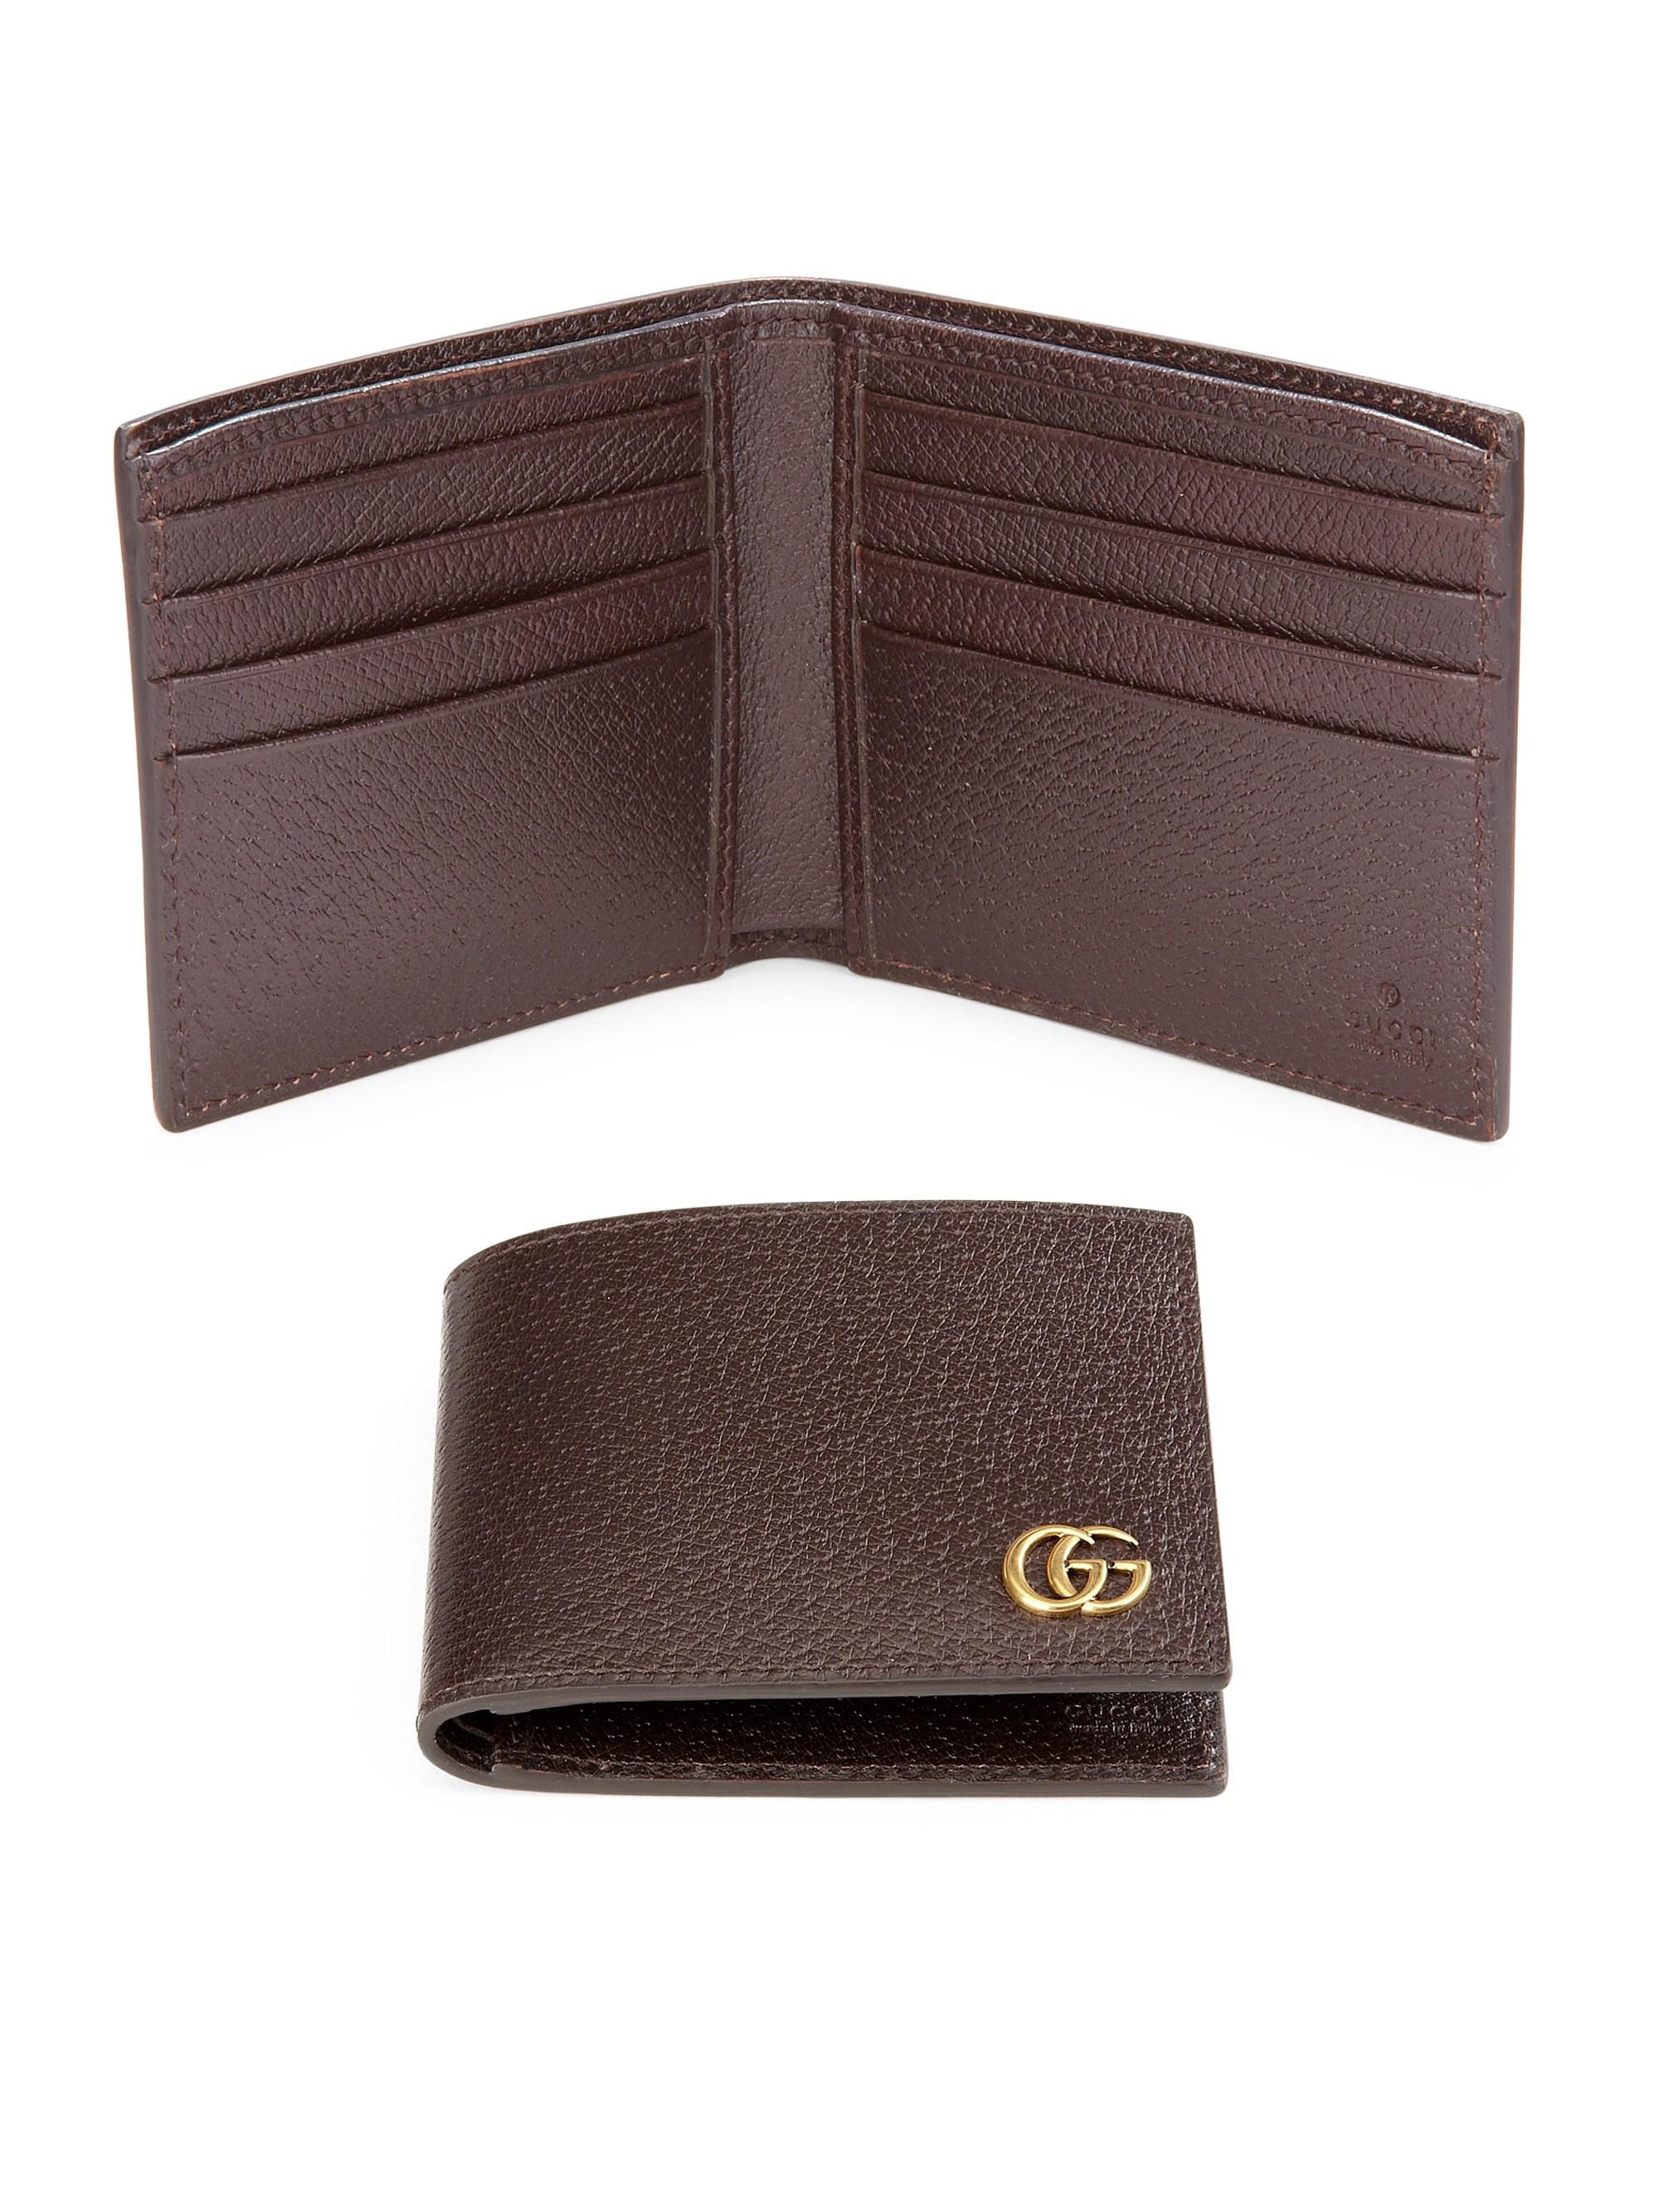 Lyst - Gucci Leather Bi-fold Wallet in Brown for Men